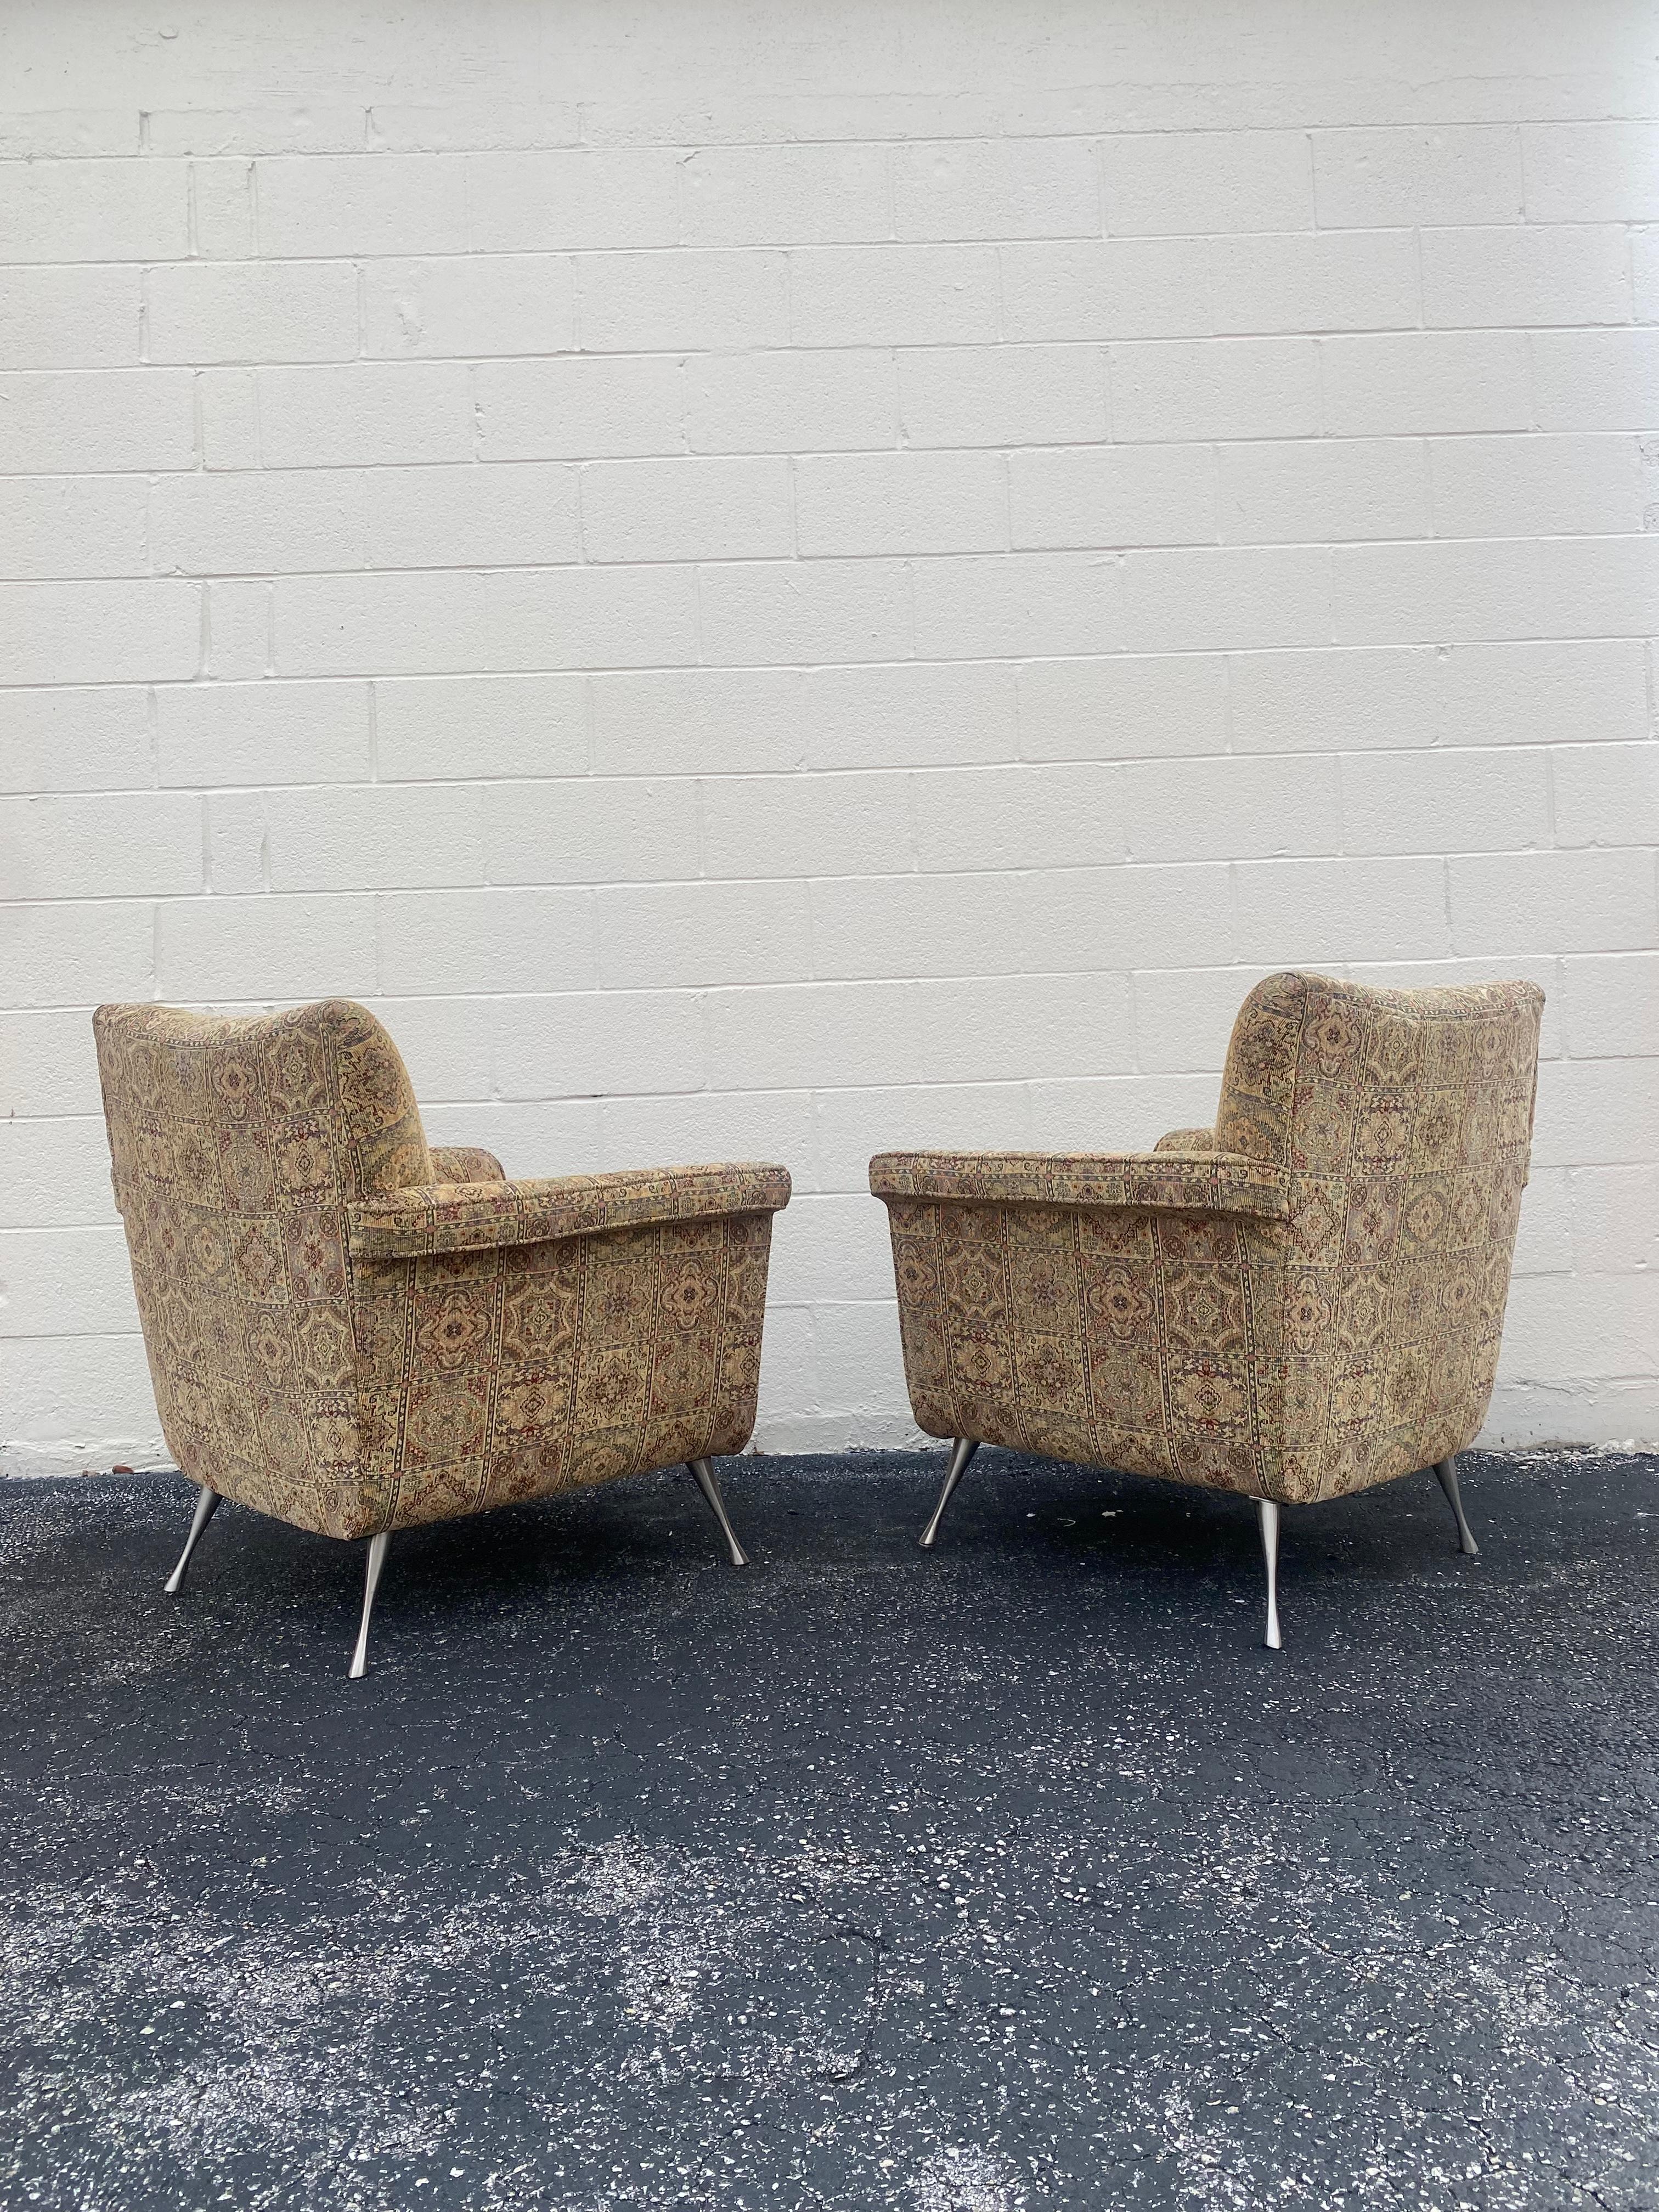 1990s Carter Sculptural Textile Pin Legs Club Chairs, Set of 2 In Excellent Condition For Sale In Fort Lauderdale, FL